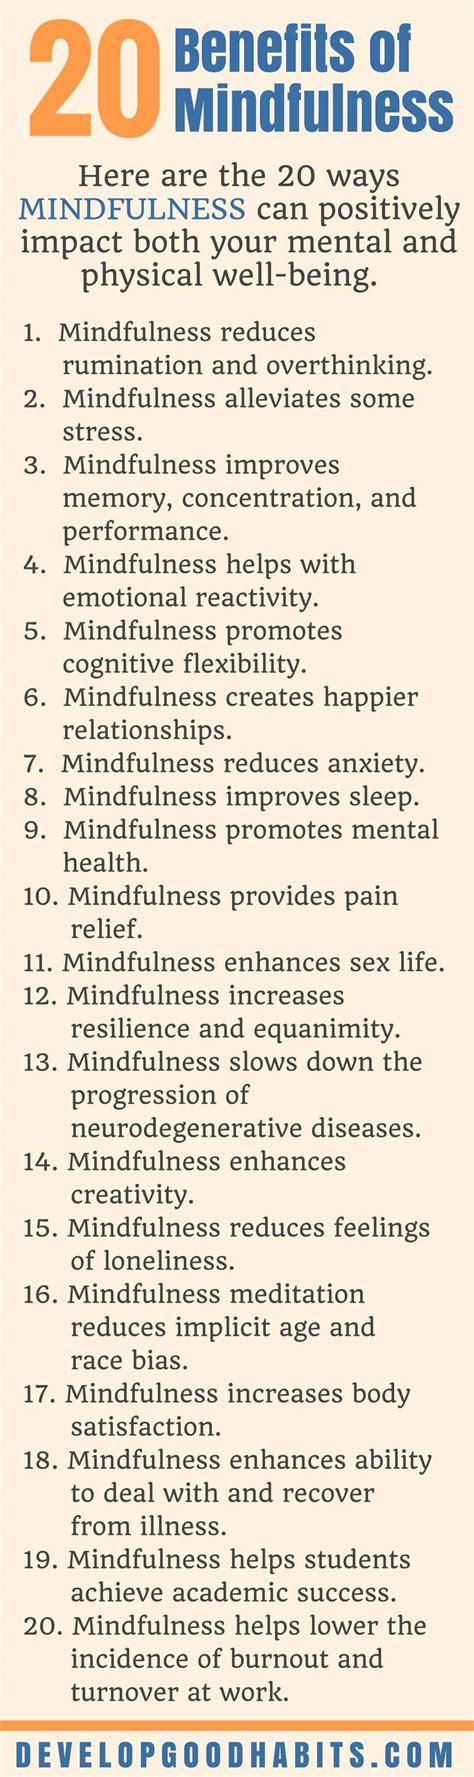 how to practice mindfulness 2020 complete guide to